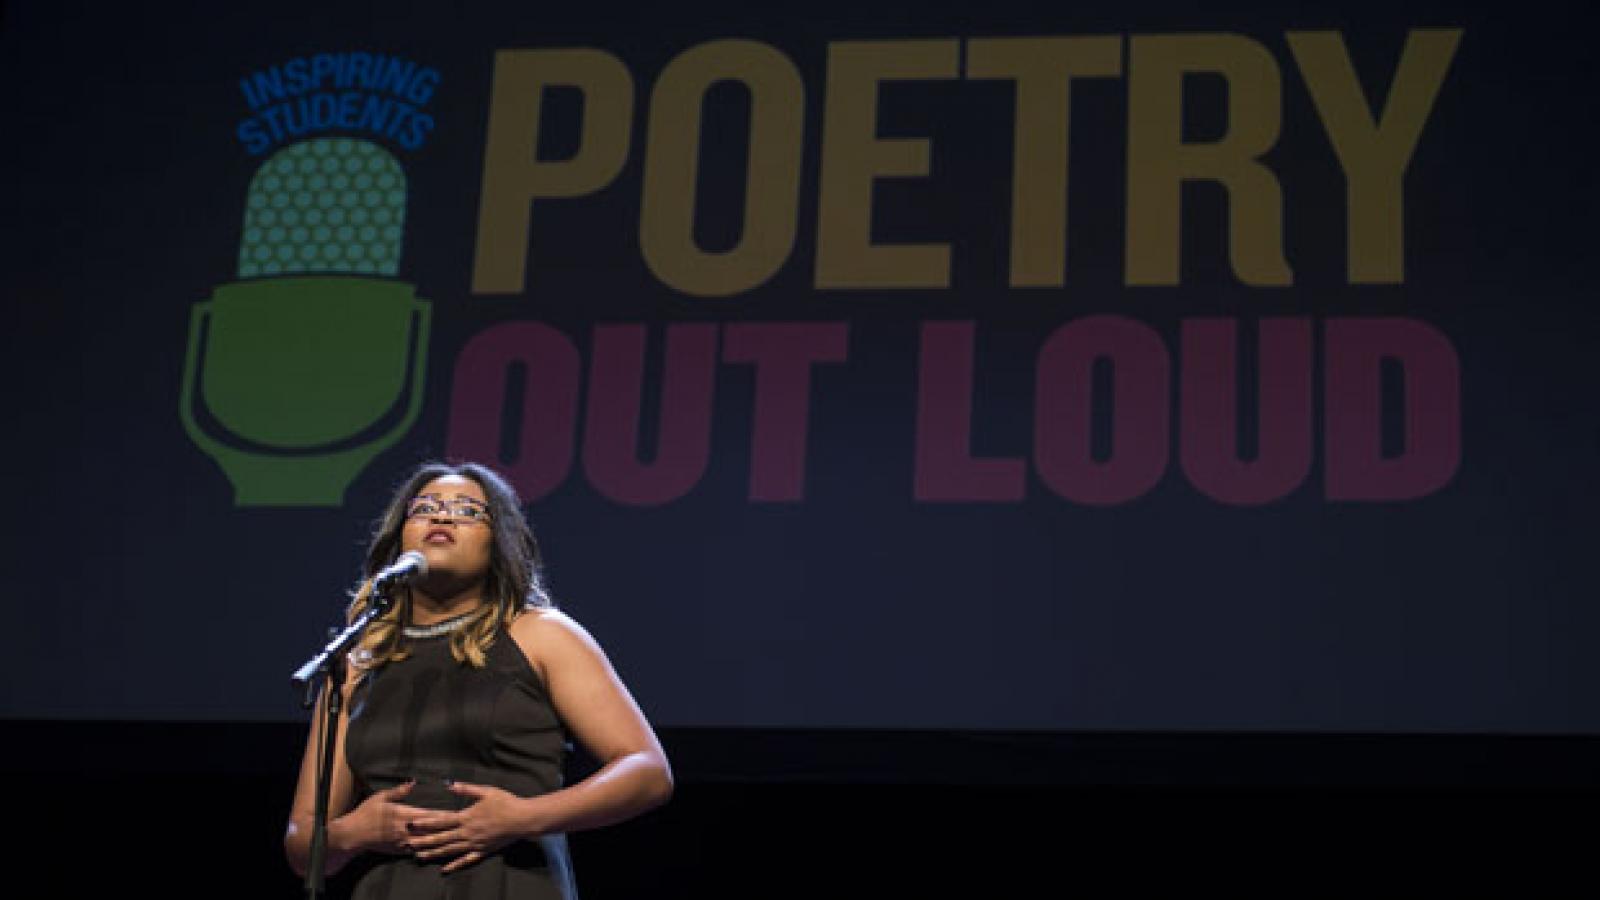 A teenage girl in a black dress speaks at a microphone with a Poetry Out Loud sign behind her.